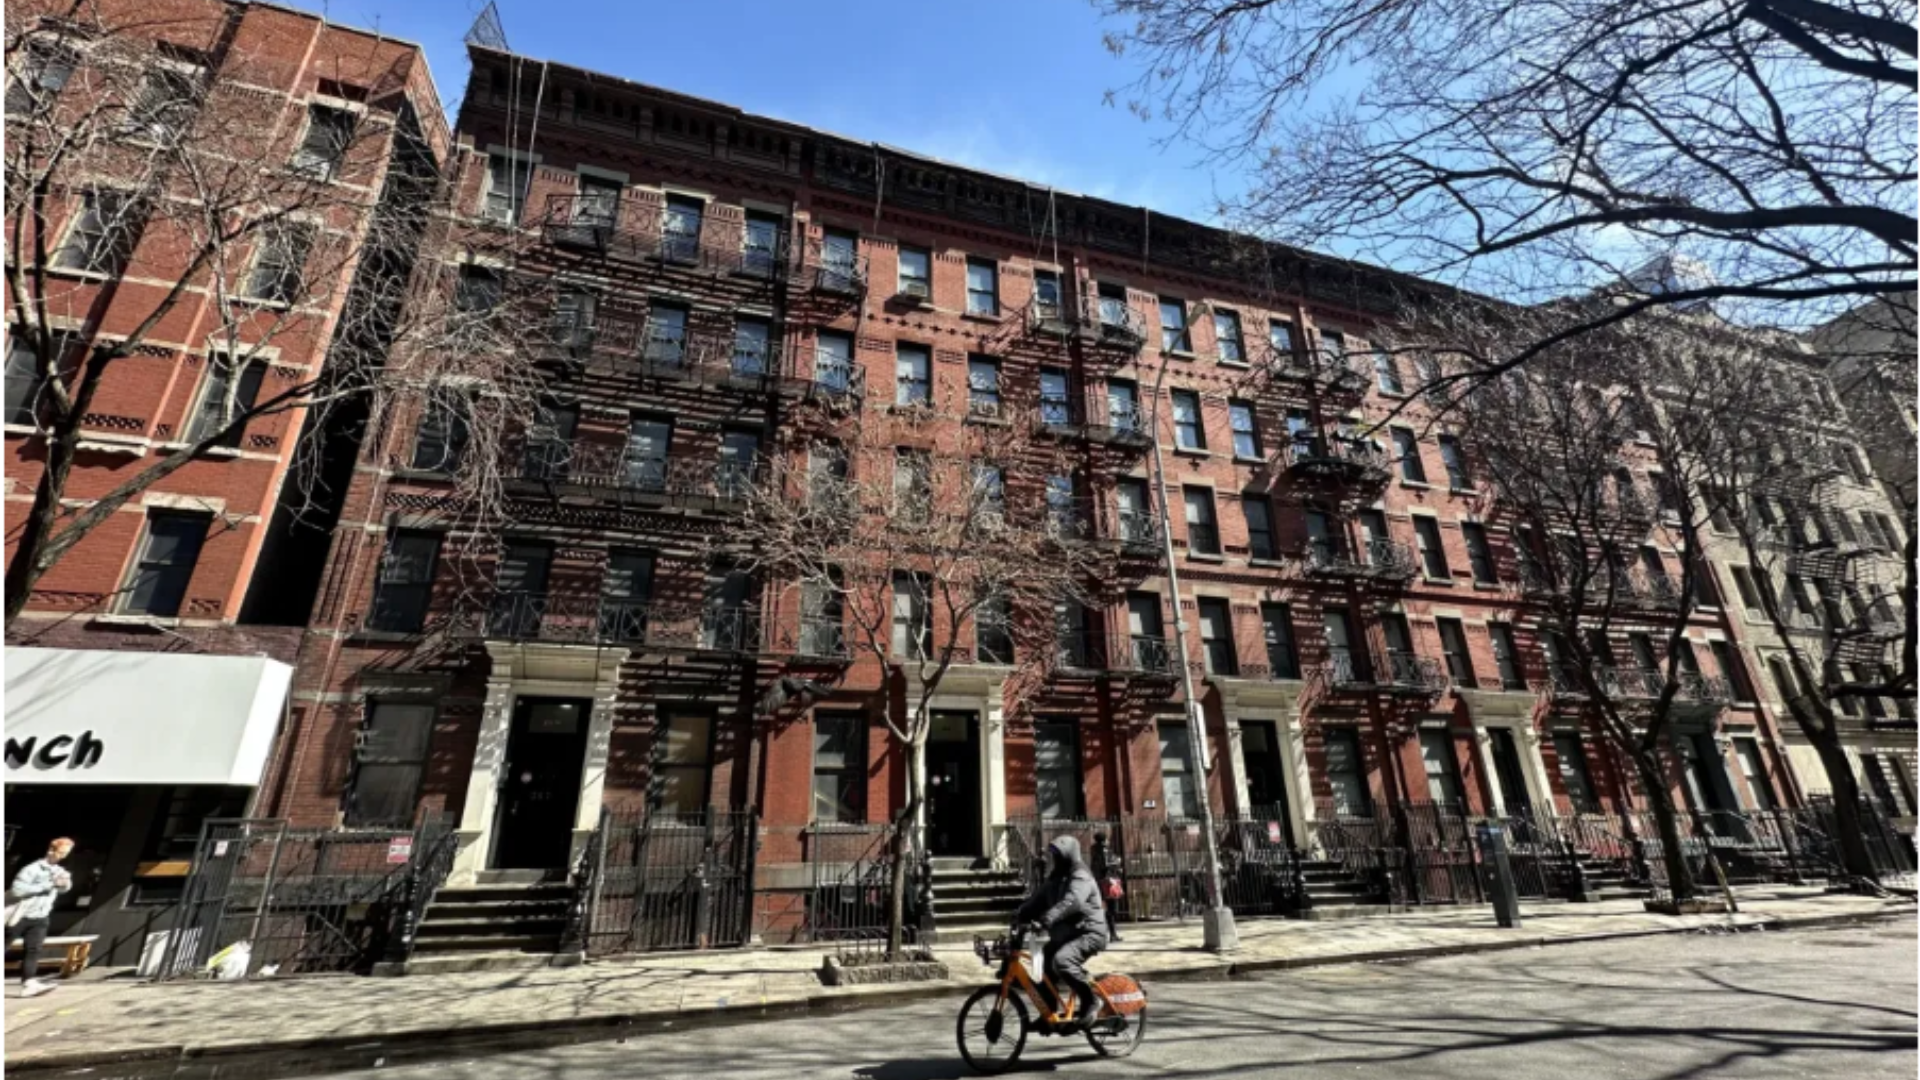 S:US Acquires Neglected Hell’s Kitchen Tenements, Plans Renovation for Affordable Housing